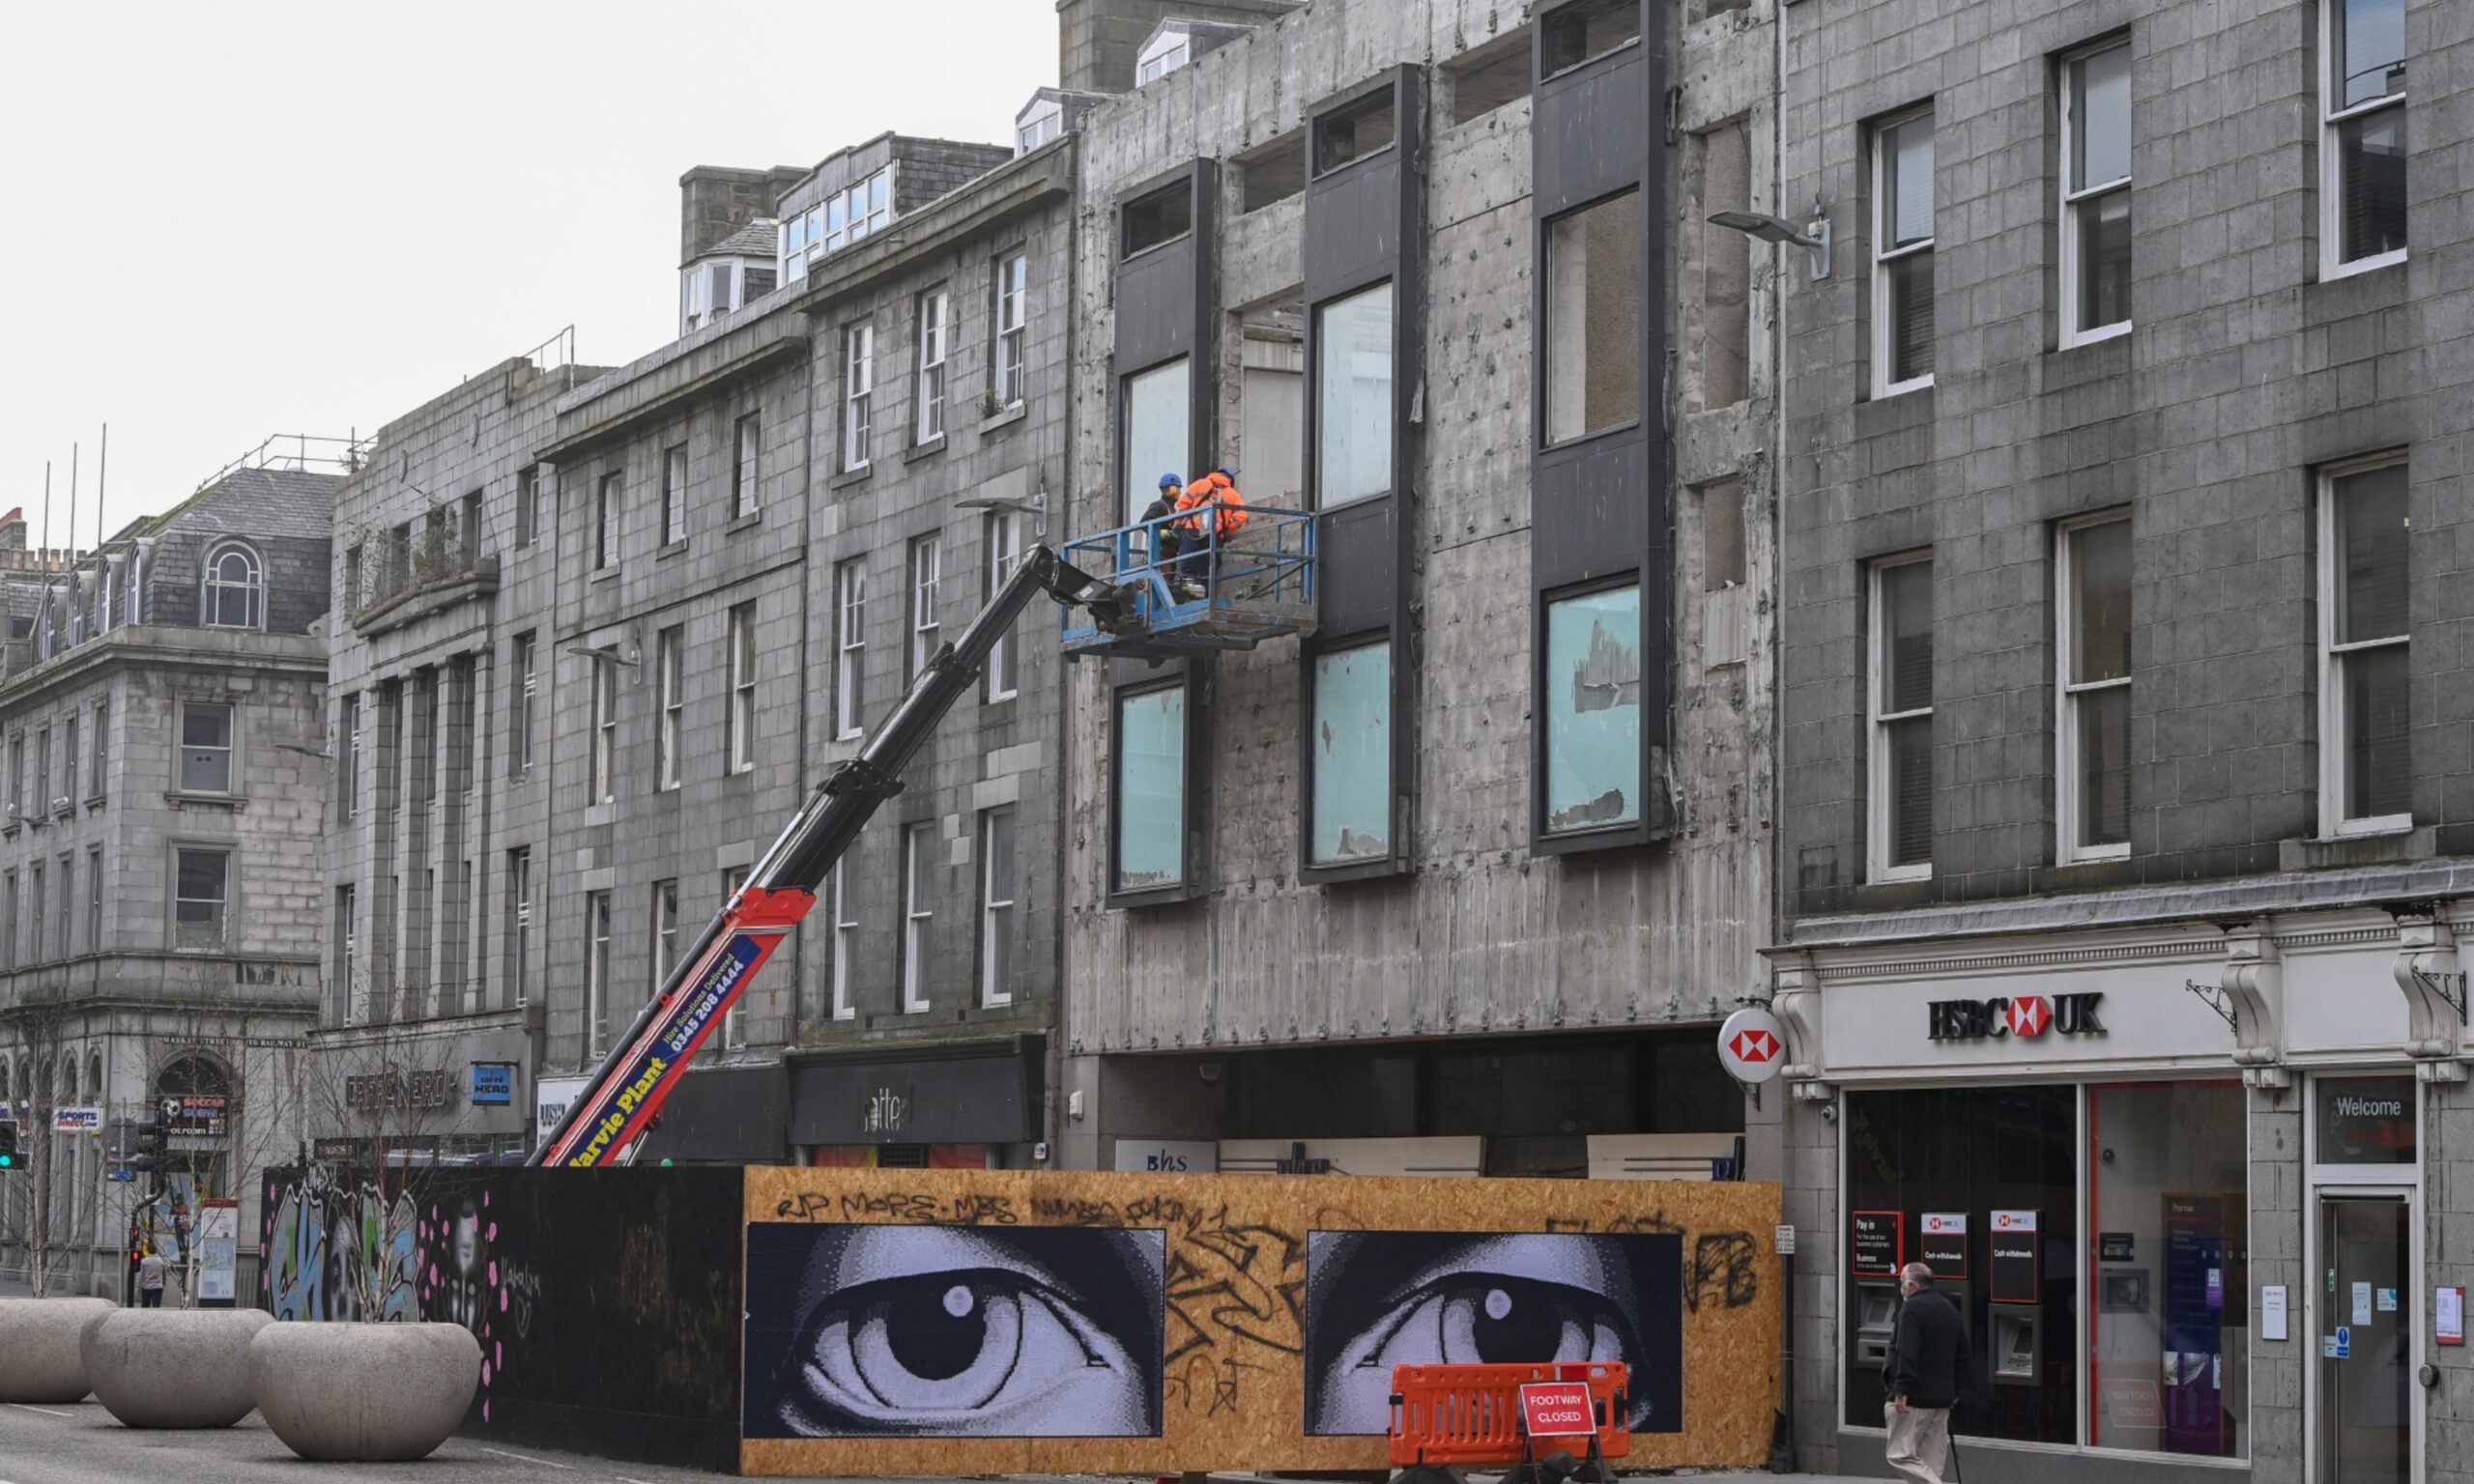 Two workers on a cherry picker taking parts of the Union Street building down